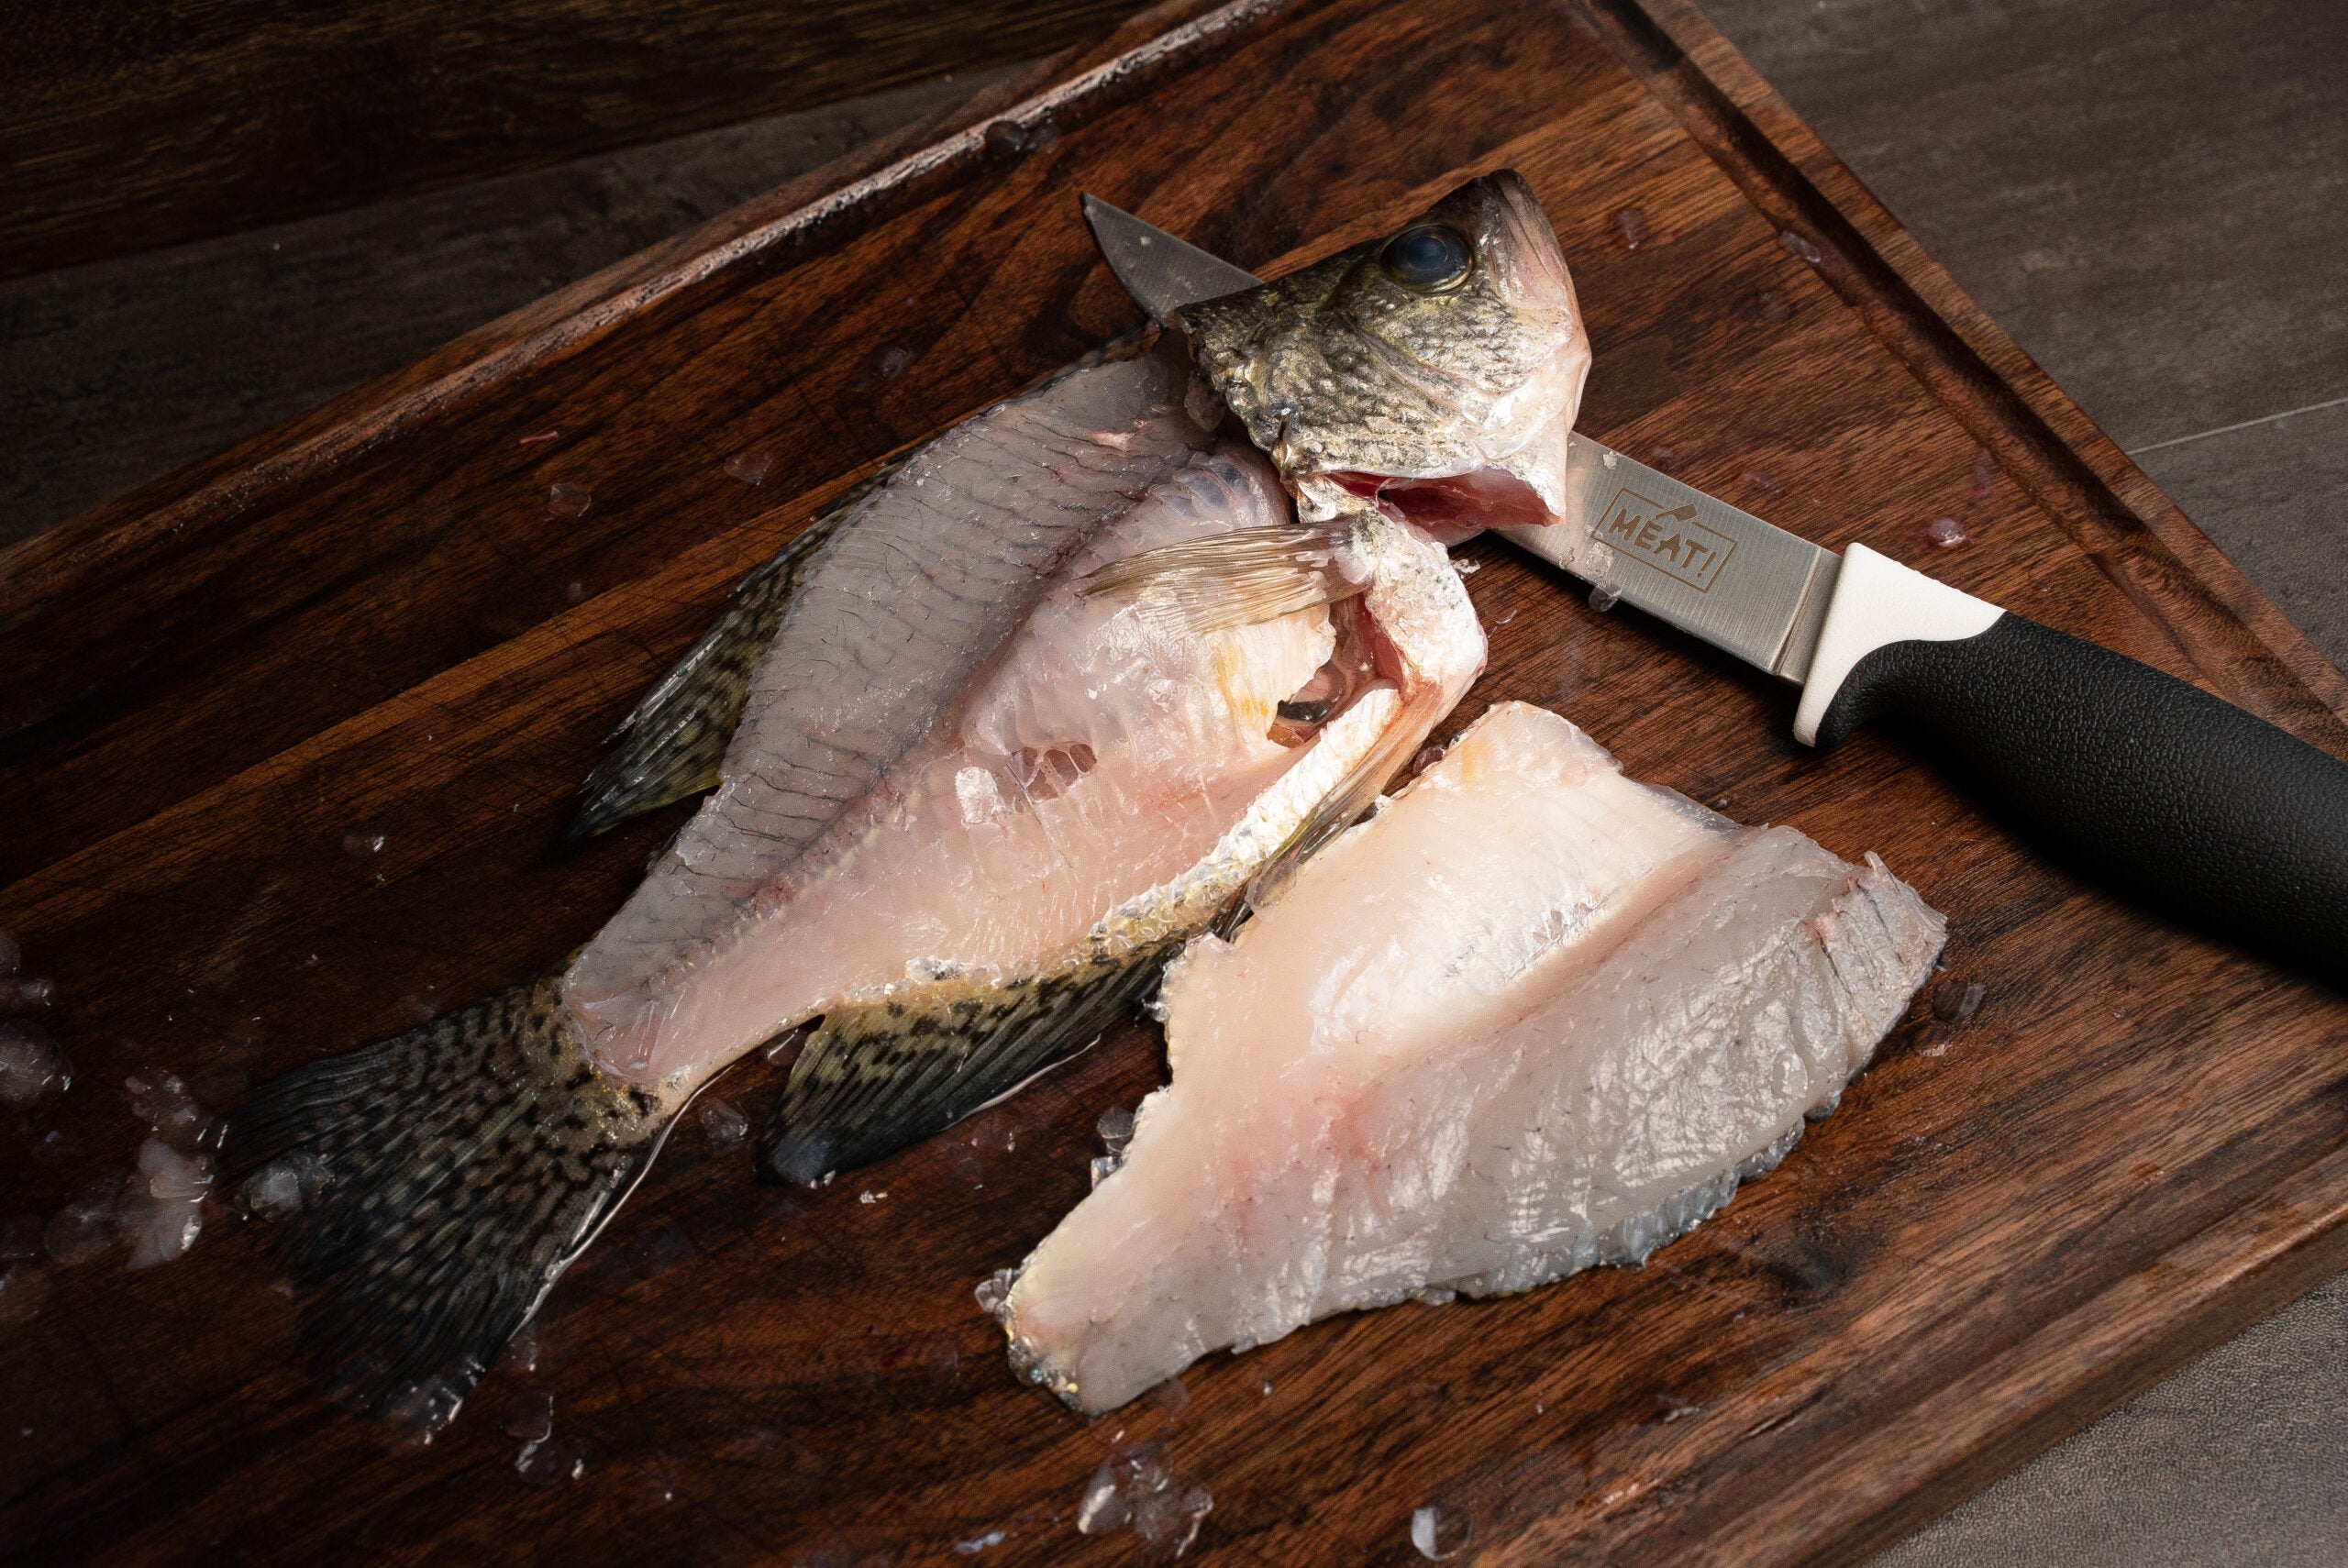 A half-filleted crappie on a cutting board.